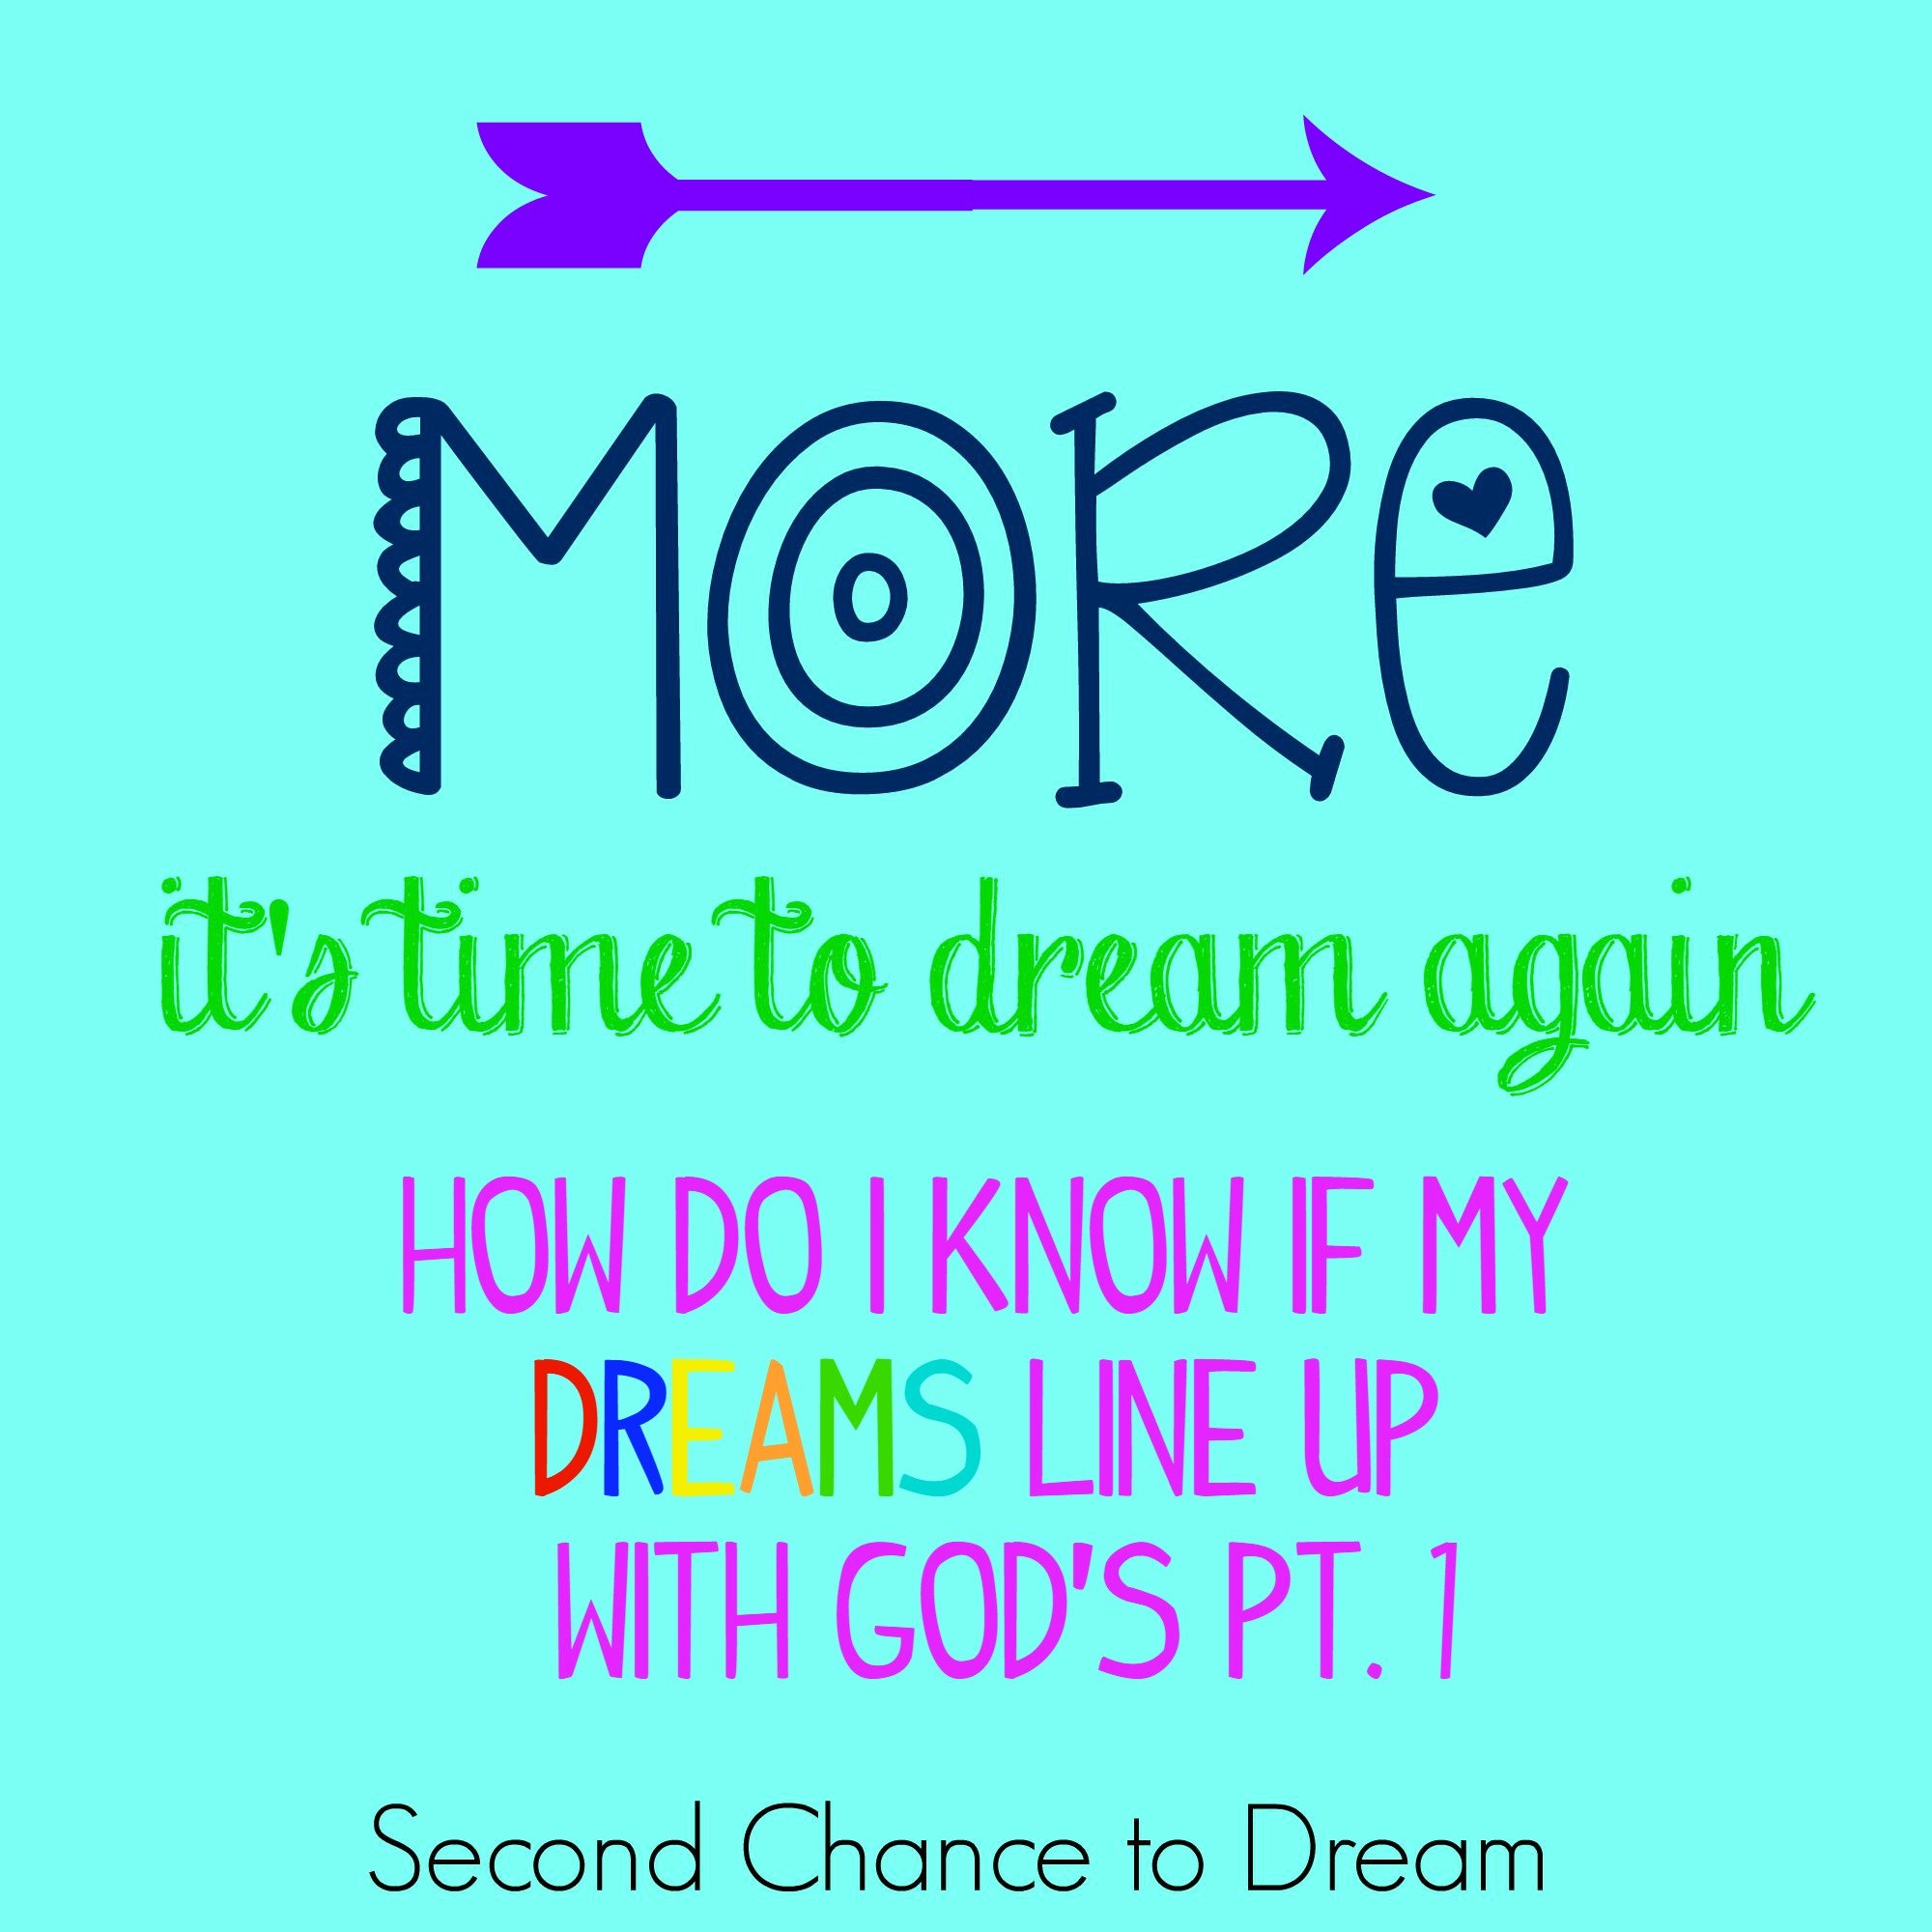 Second Chance to Dream: How do I know if my dreams line up with God Pt 1